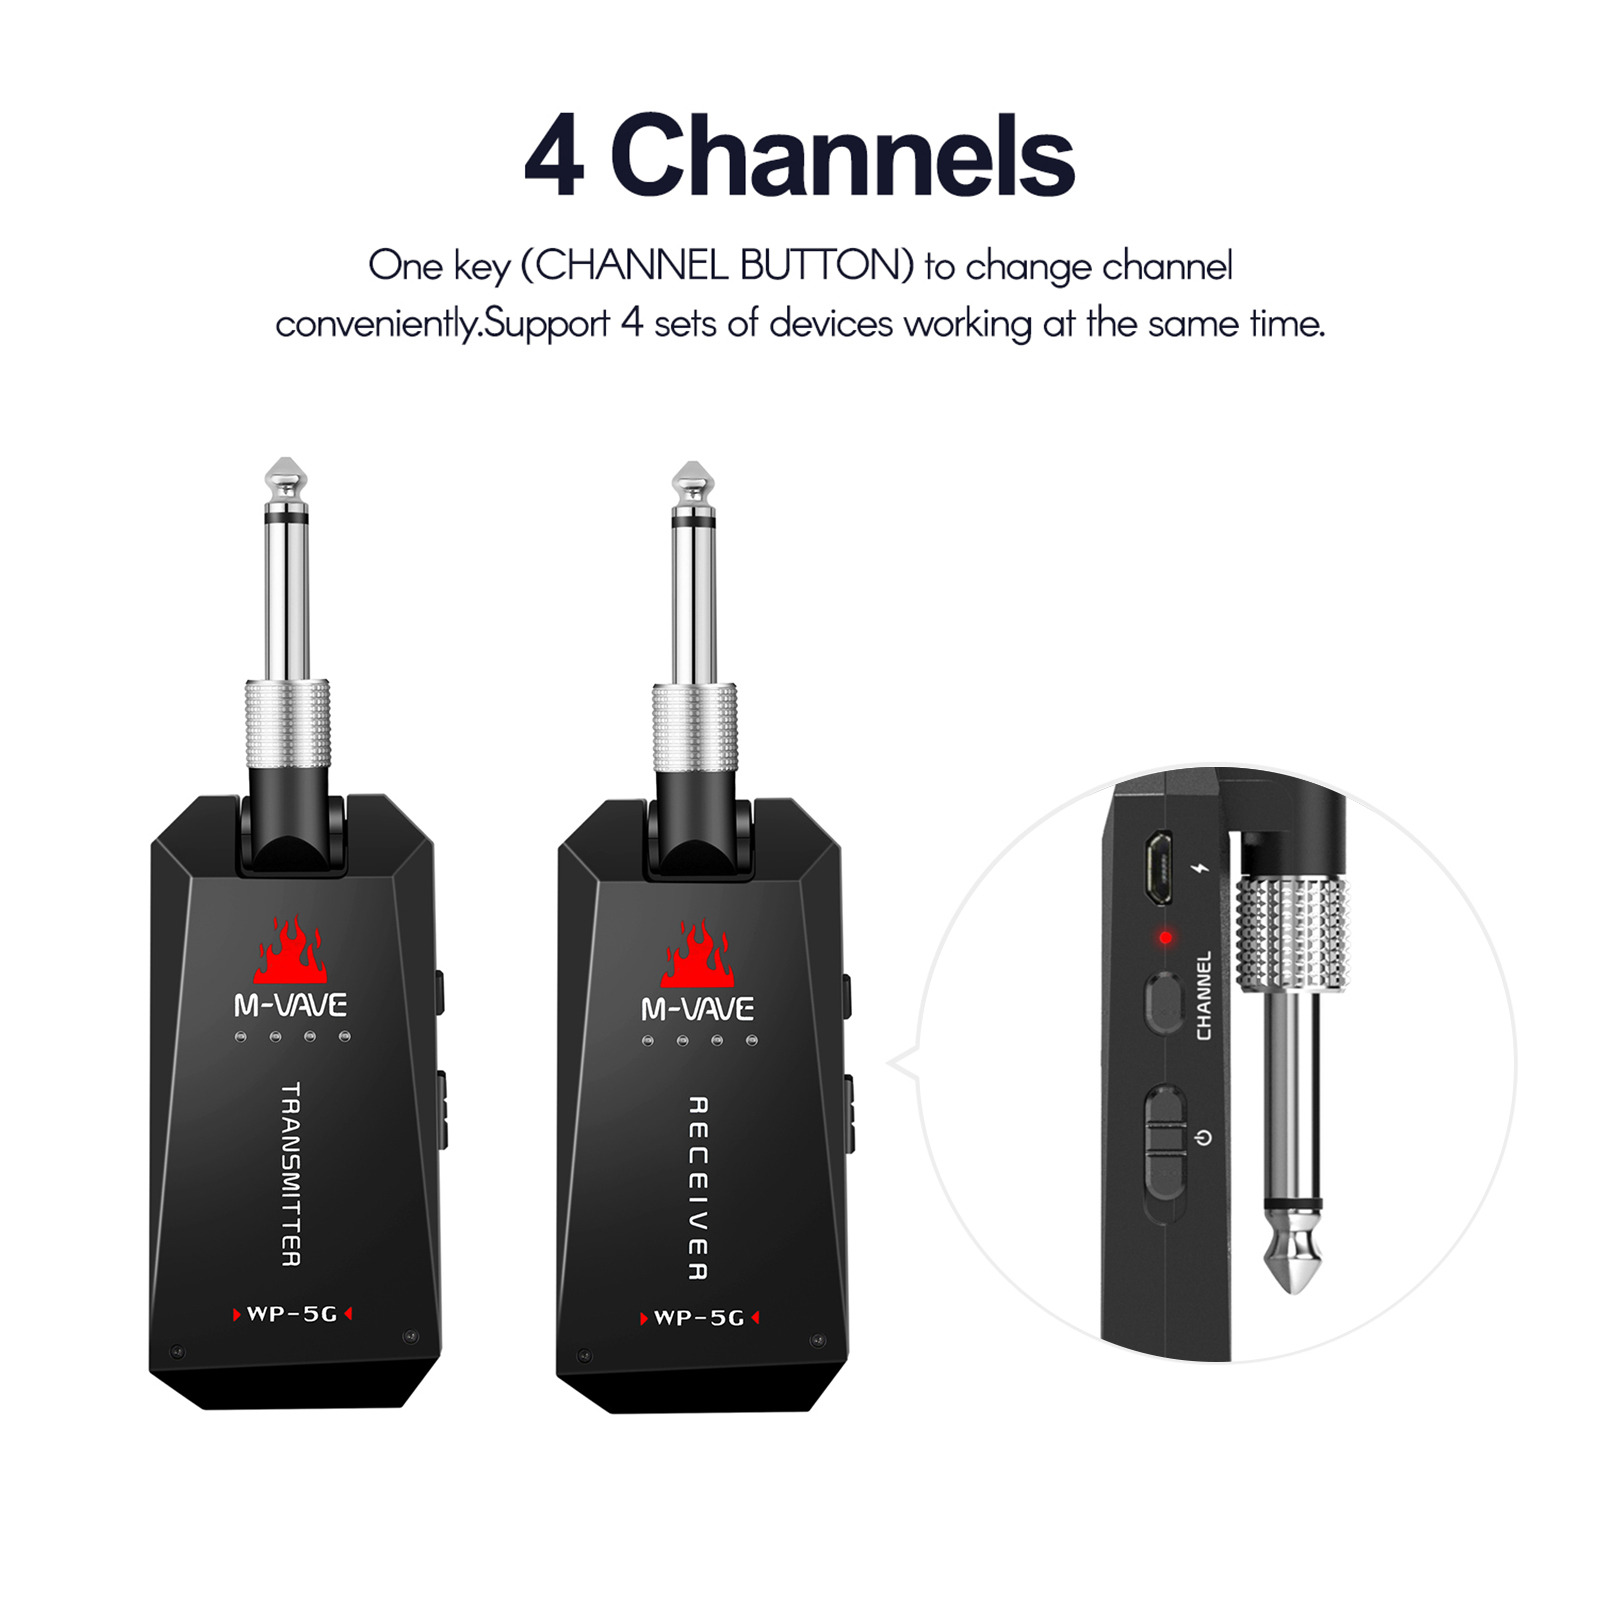 M-VAVE WP-5G Wireless 5.8G Guitar System Rechargeable Audio Transmitter and Receiver ISM Band for Electric Bass Guitars Amplifier Accessories